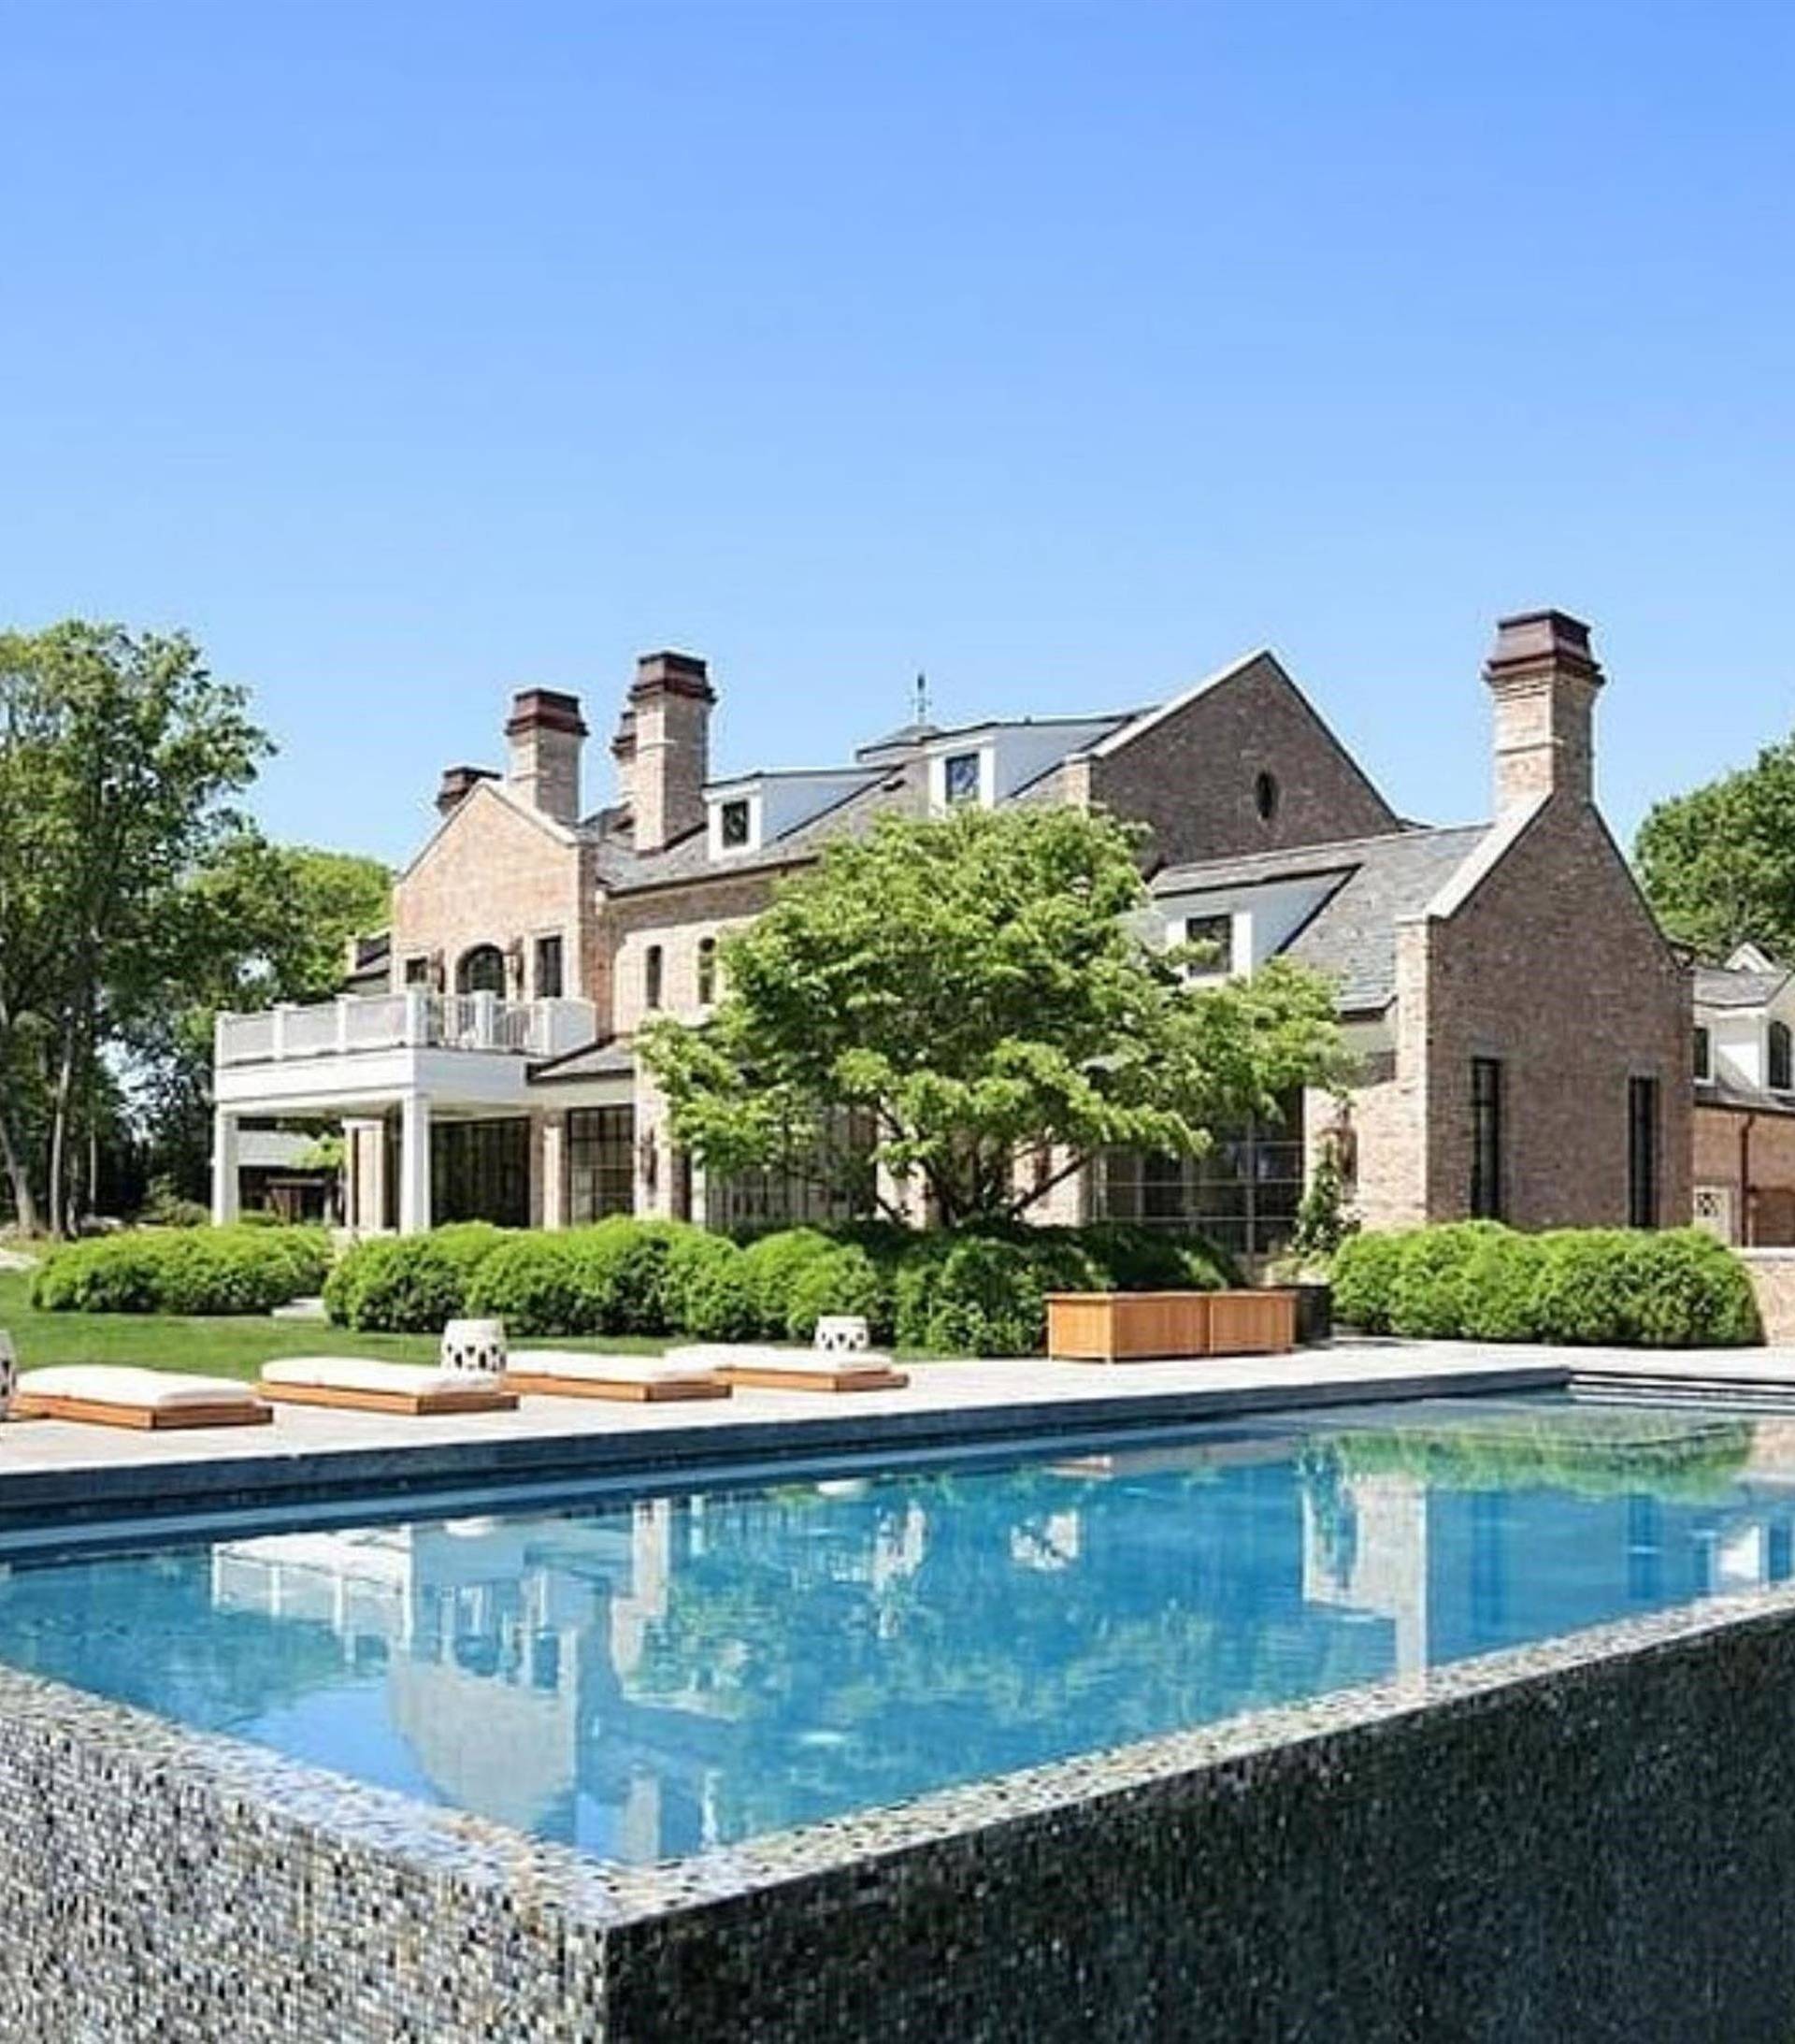 Gisele Bundchen and Tom Brady put their Boston home on the market for a whopping $39.5 million